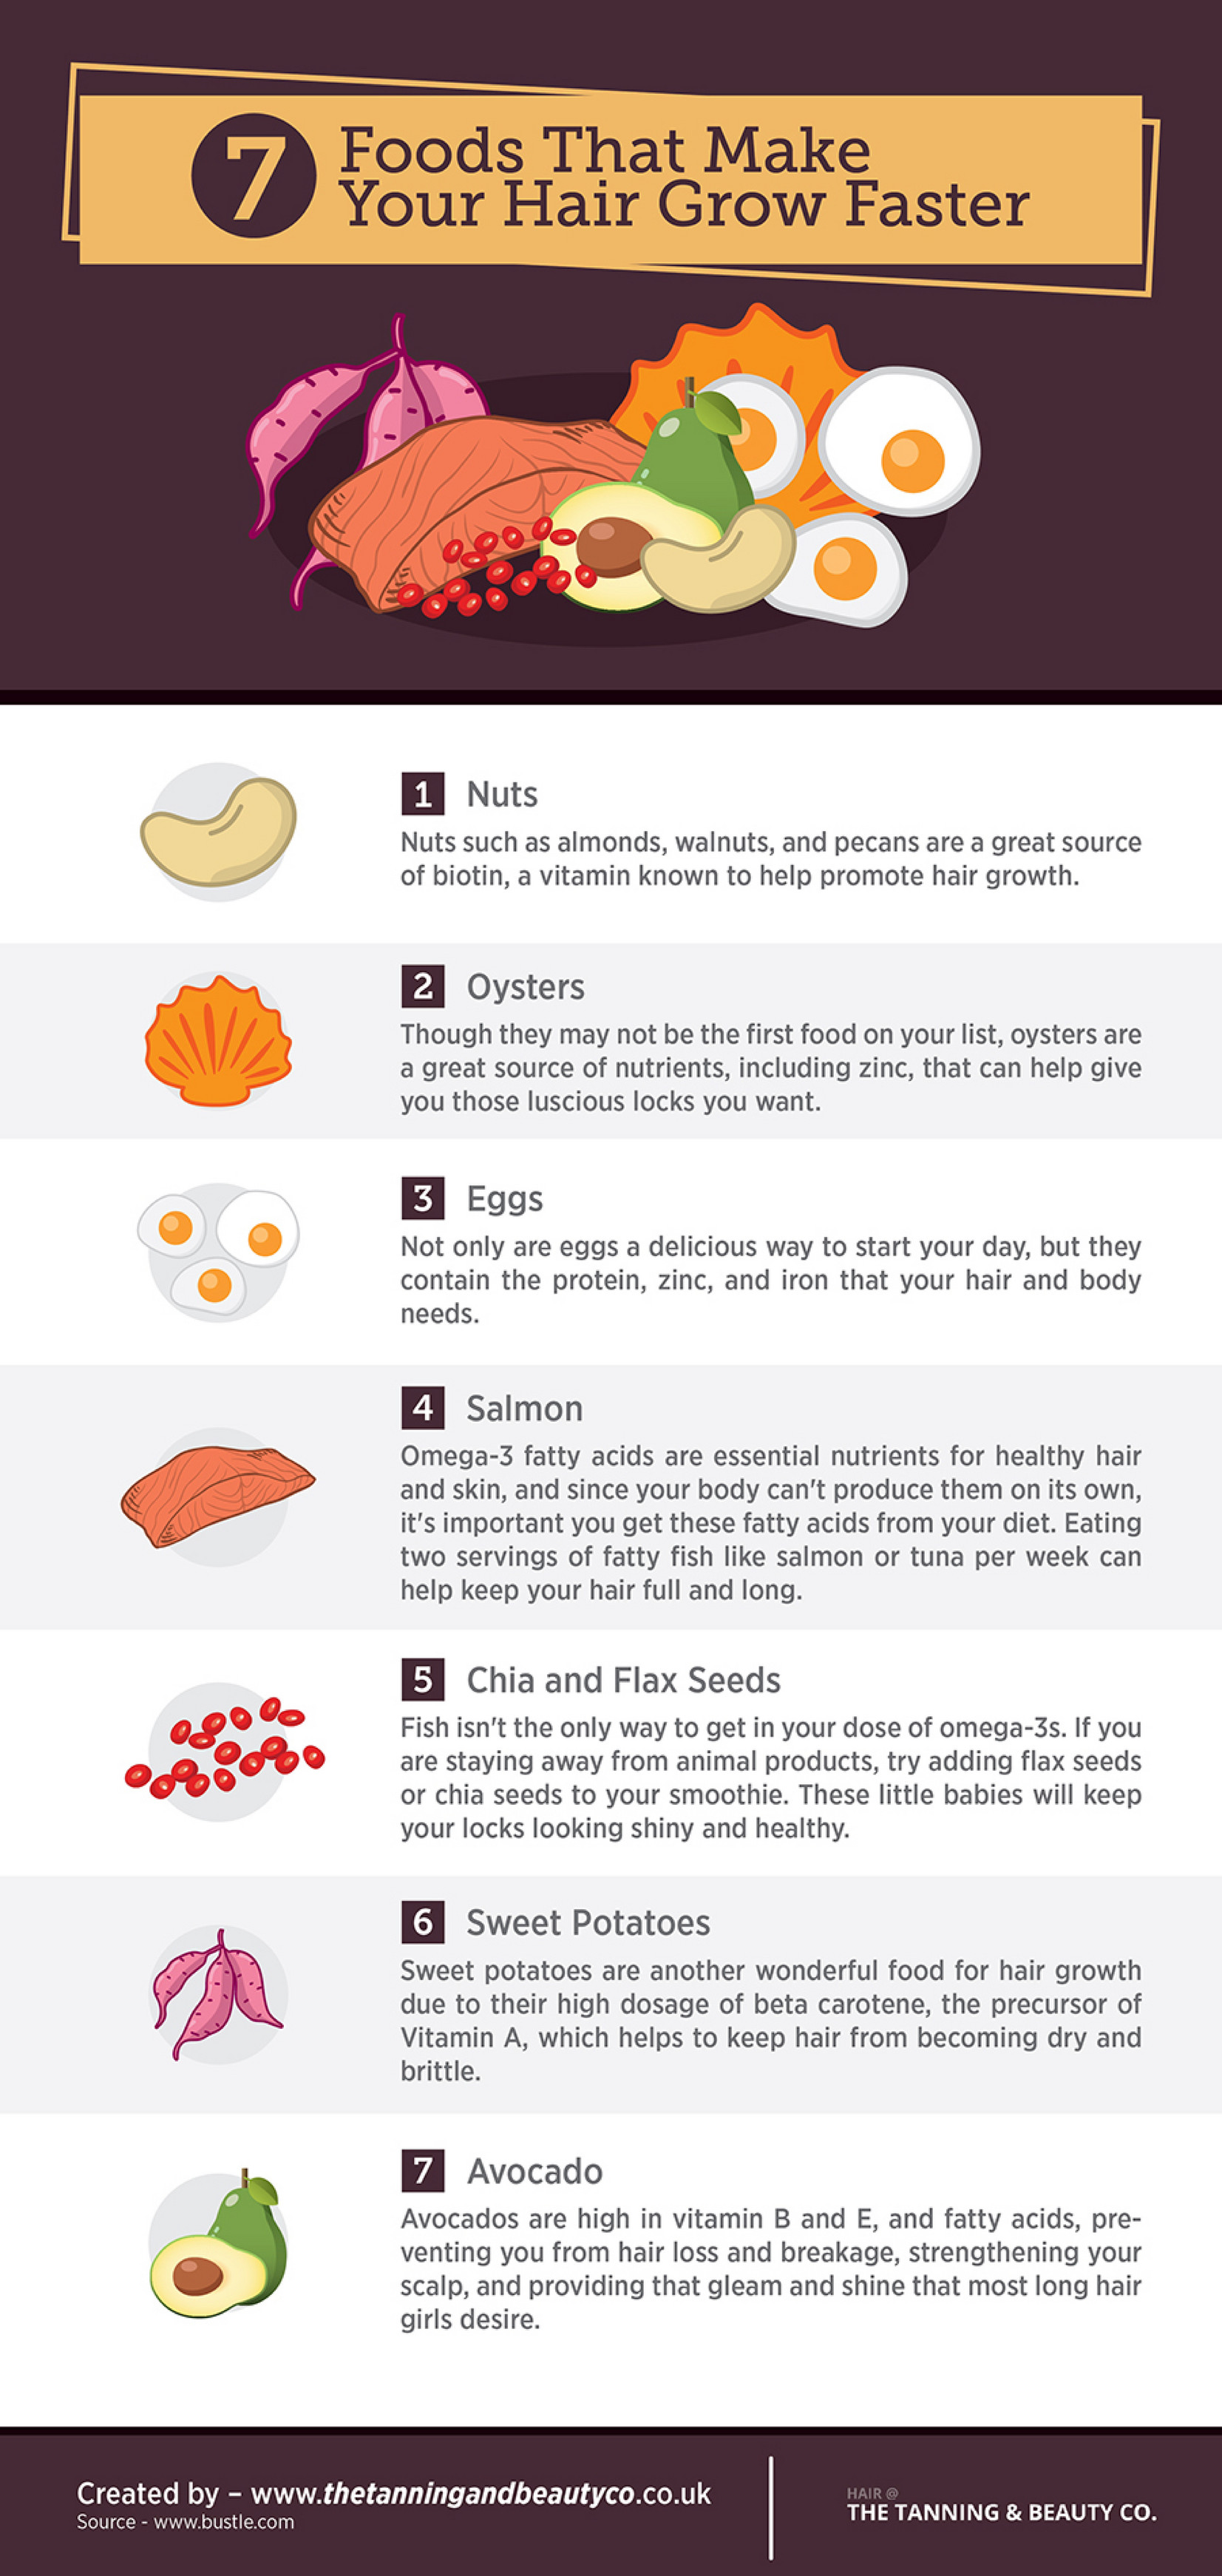 My publications - 7 Foods That Make Your Hair Grow Faster - Page 1 -  Created with 